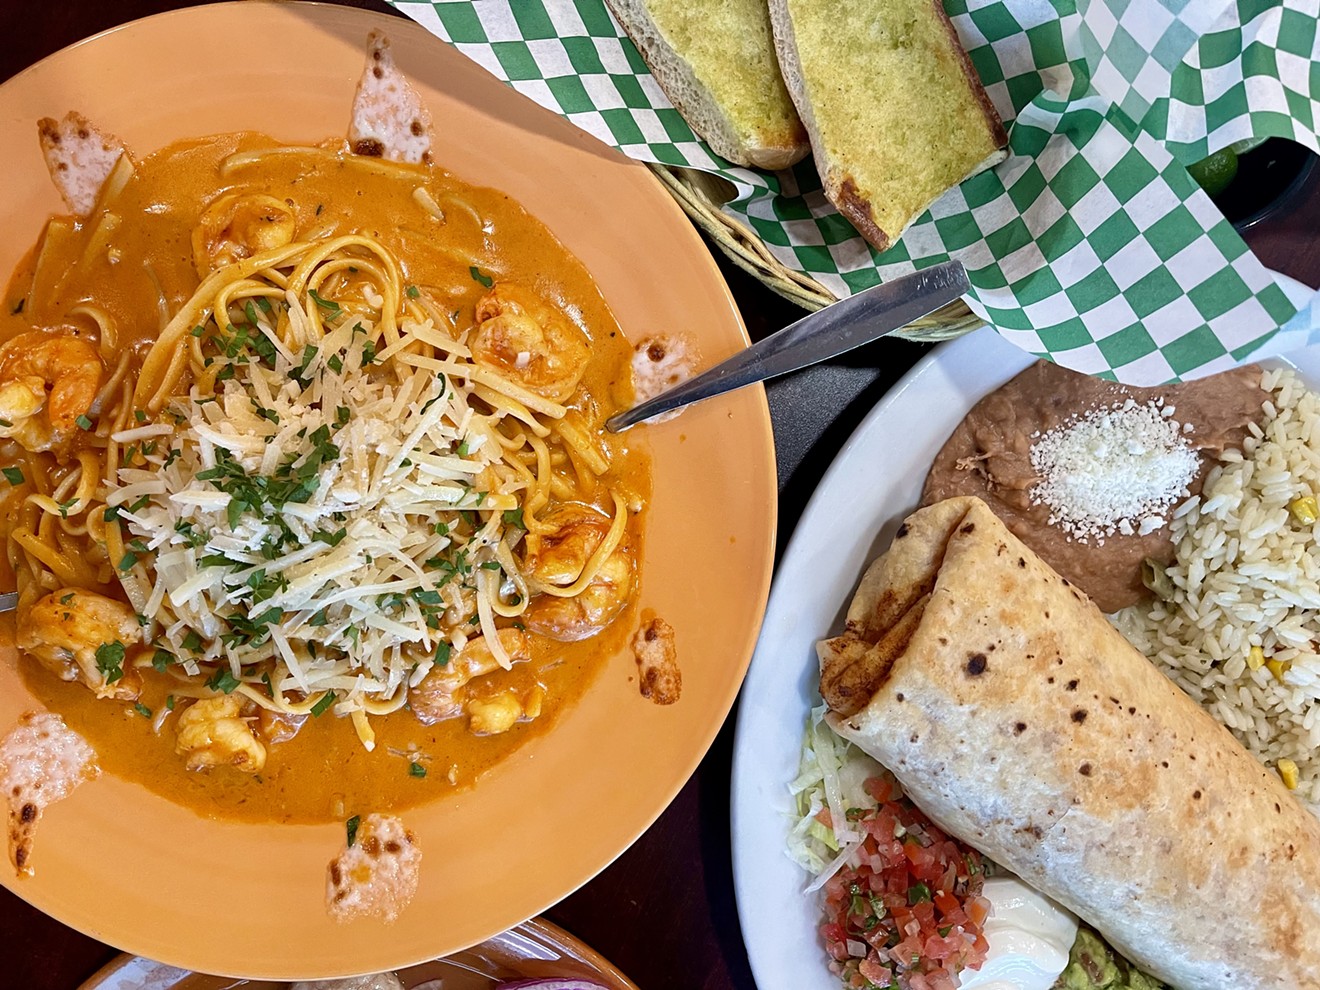 Pasta is an unexpected but welcome addition to the menu at Mariscos Ensenada.